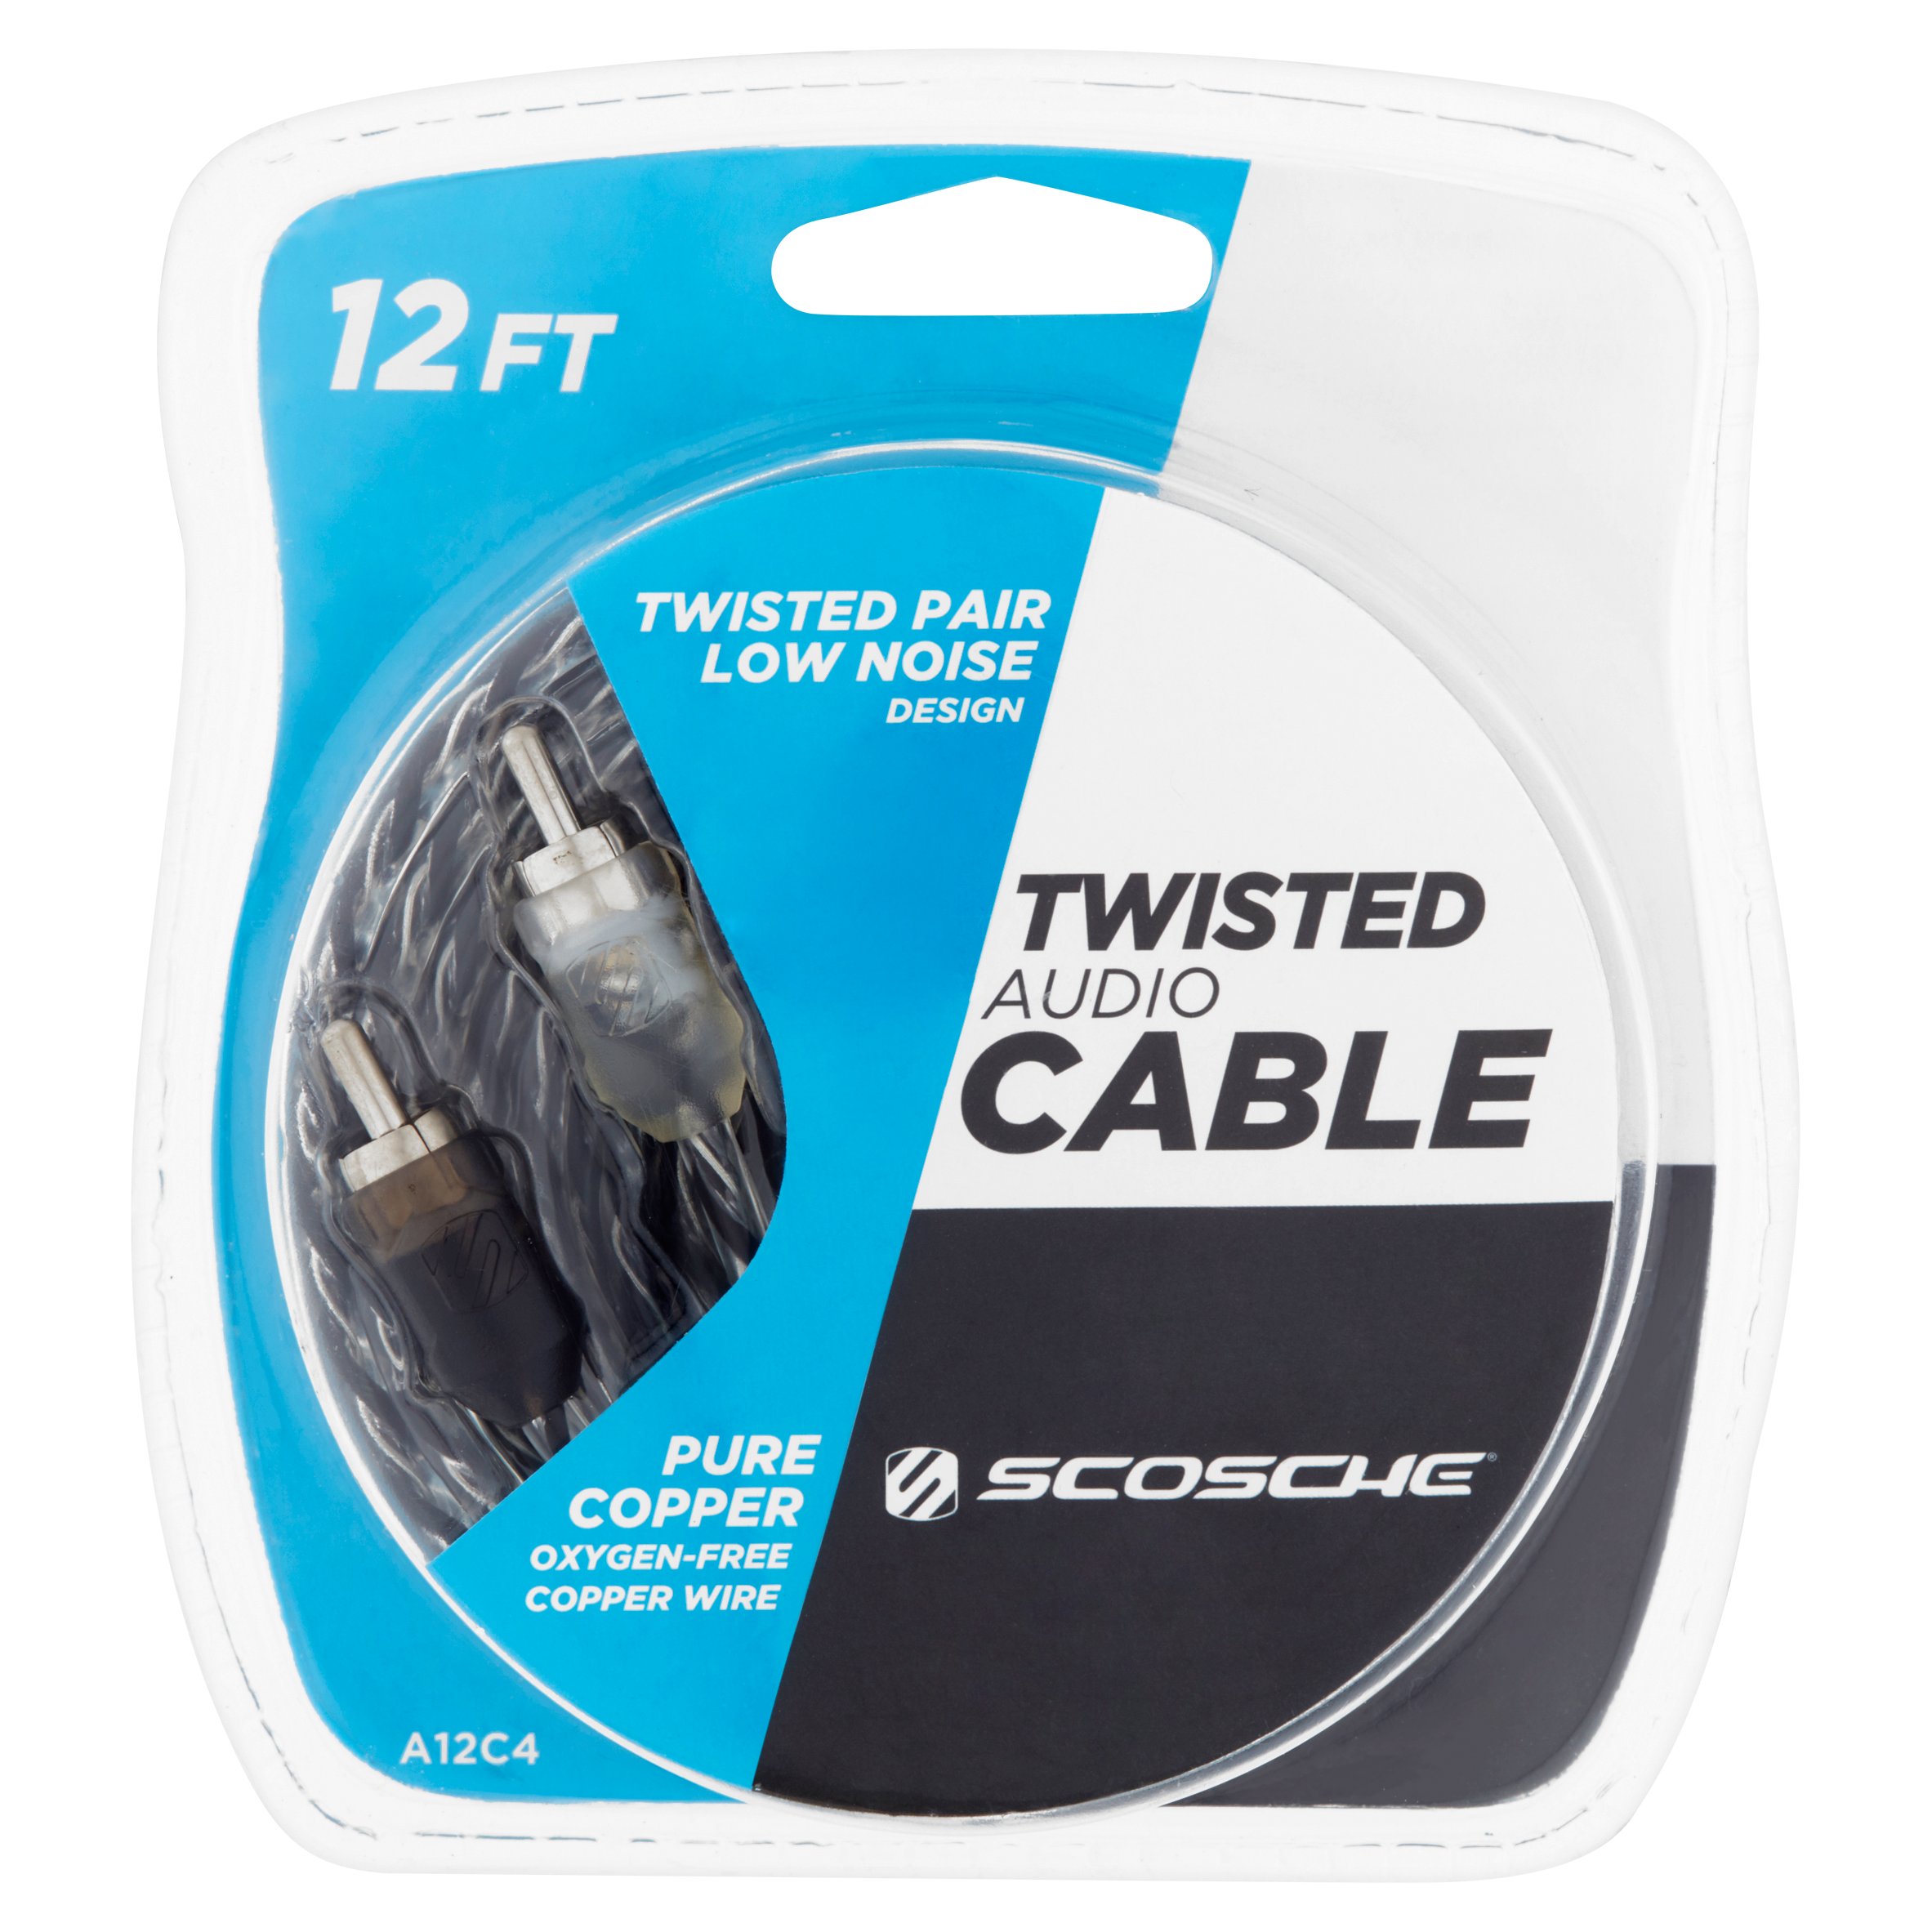 Scosche A12C4 - Twisted RCA Audio Cable (12 ft.) - image 1 of 6